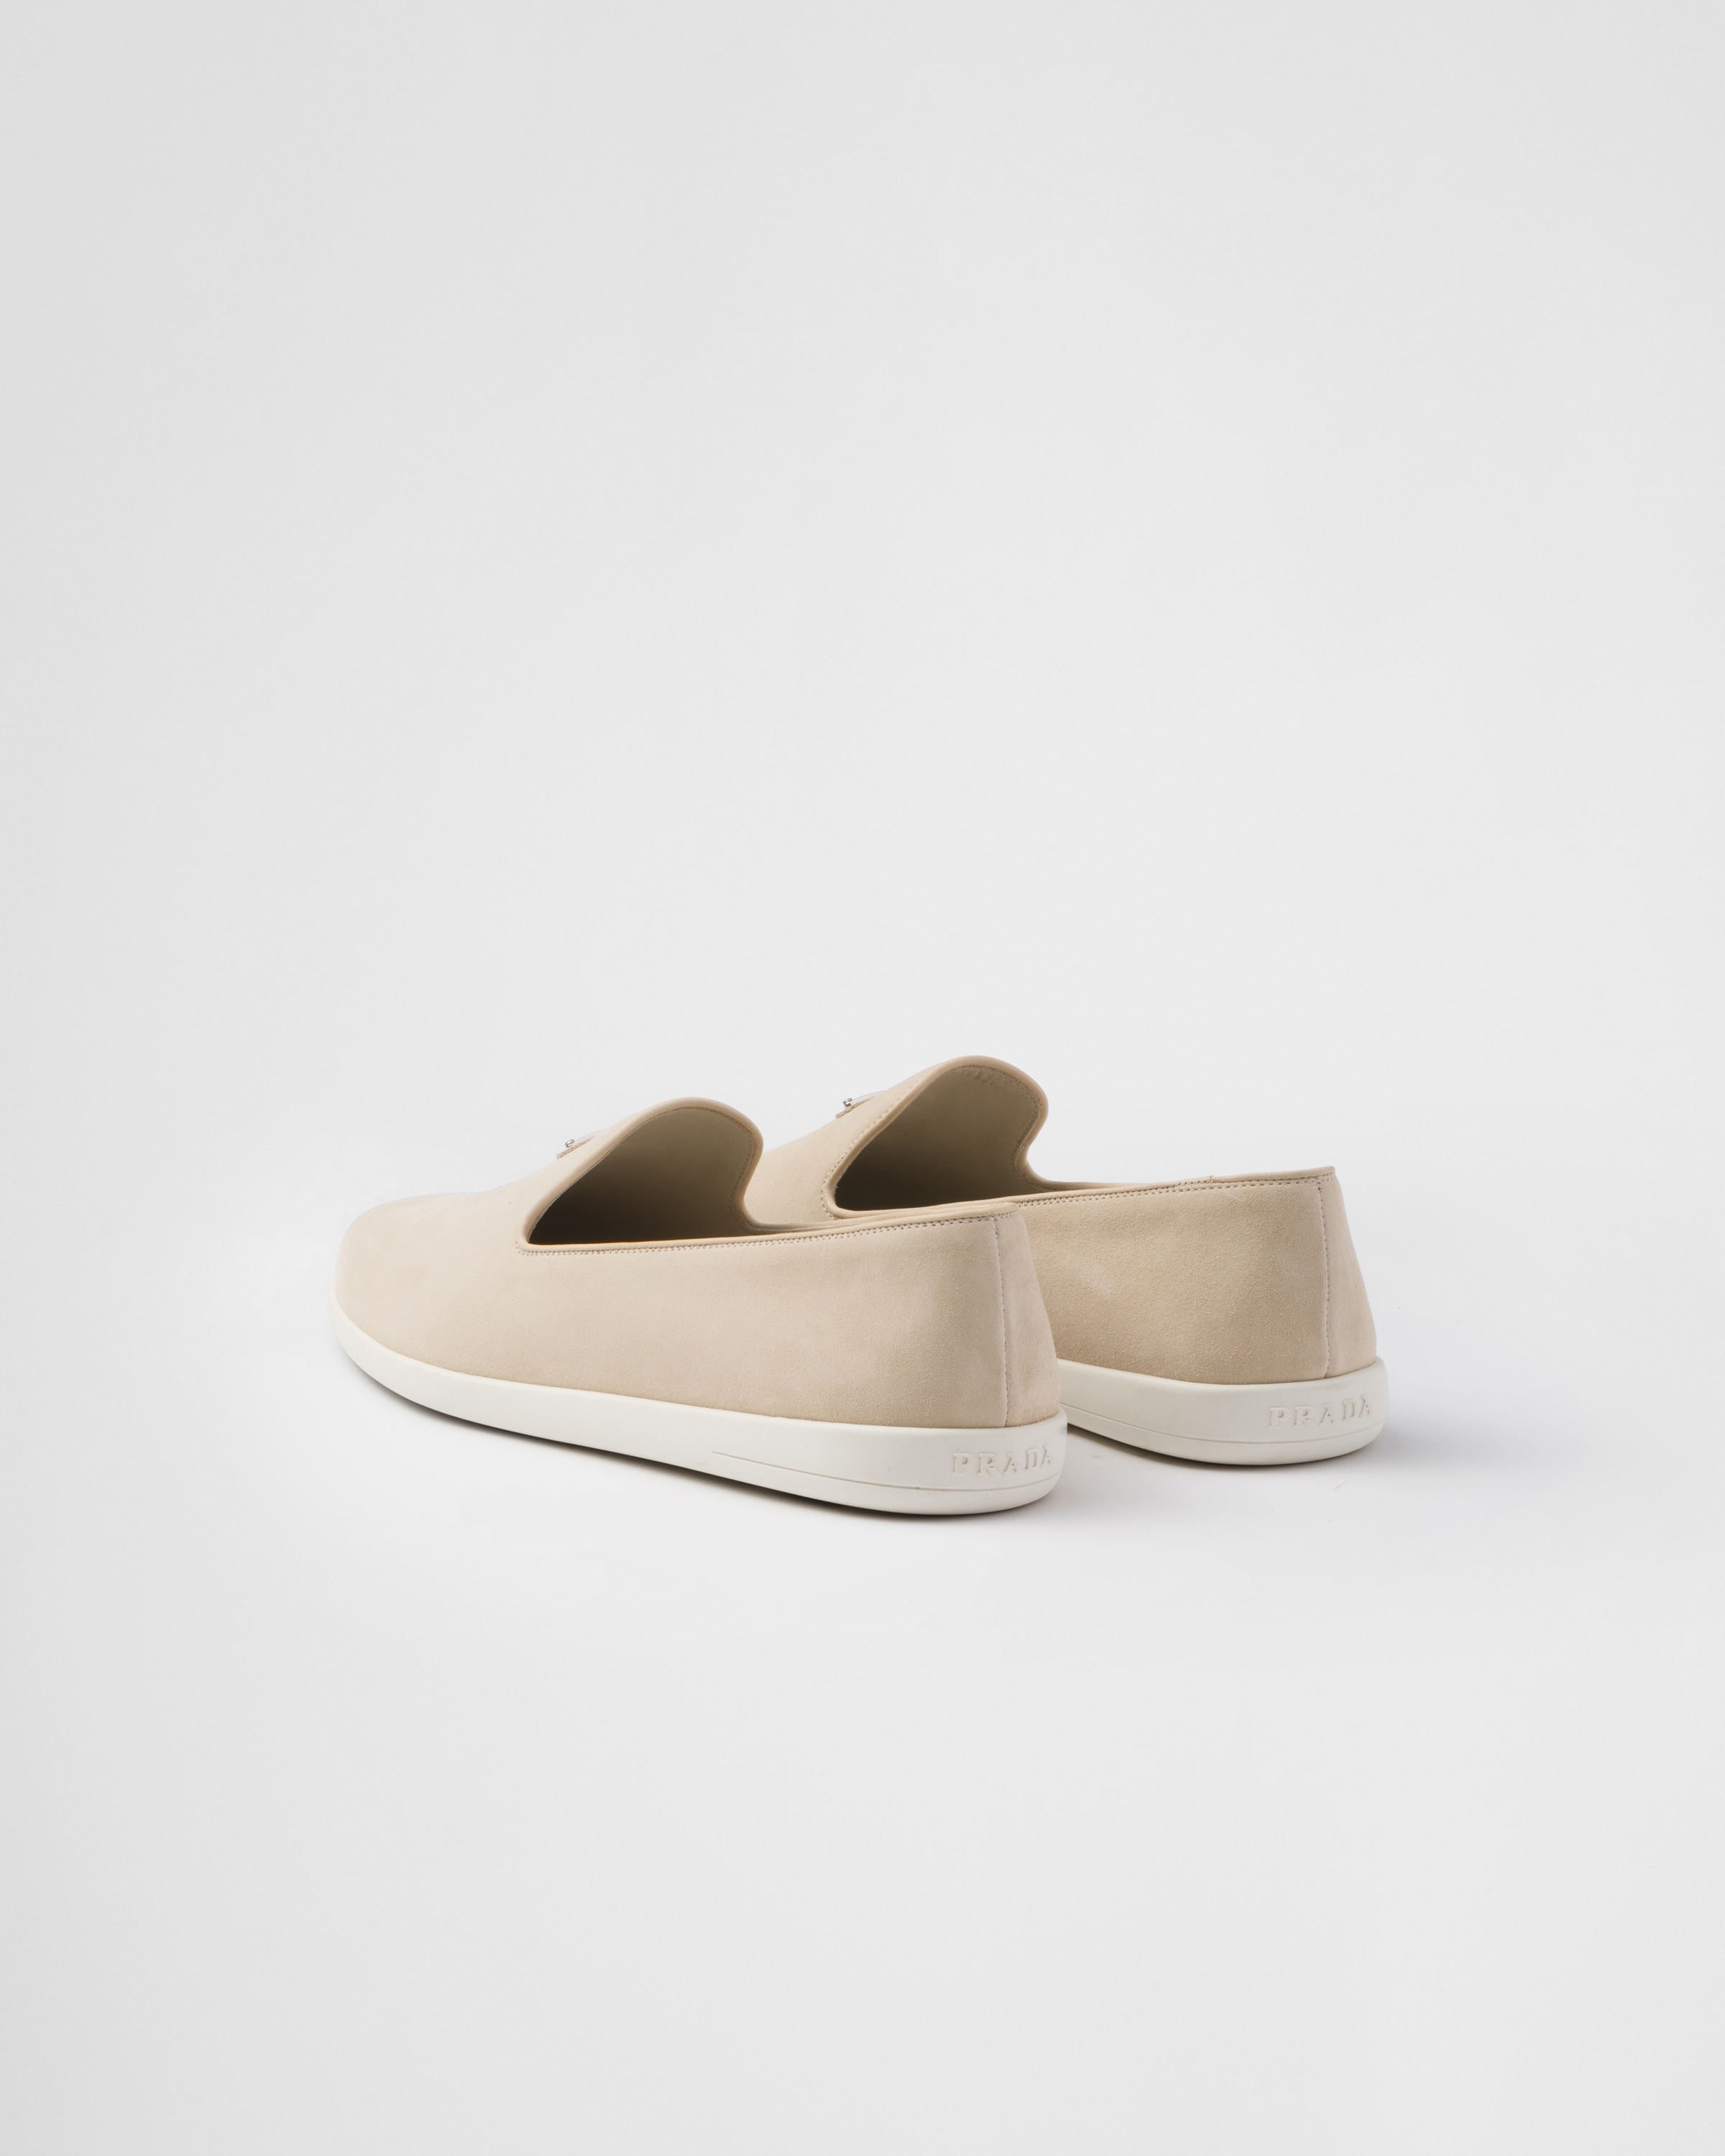 Suede calf leather slip-ons - 5